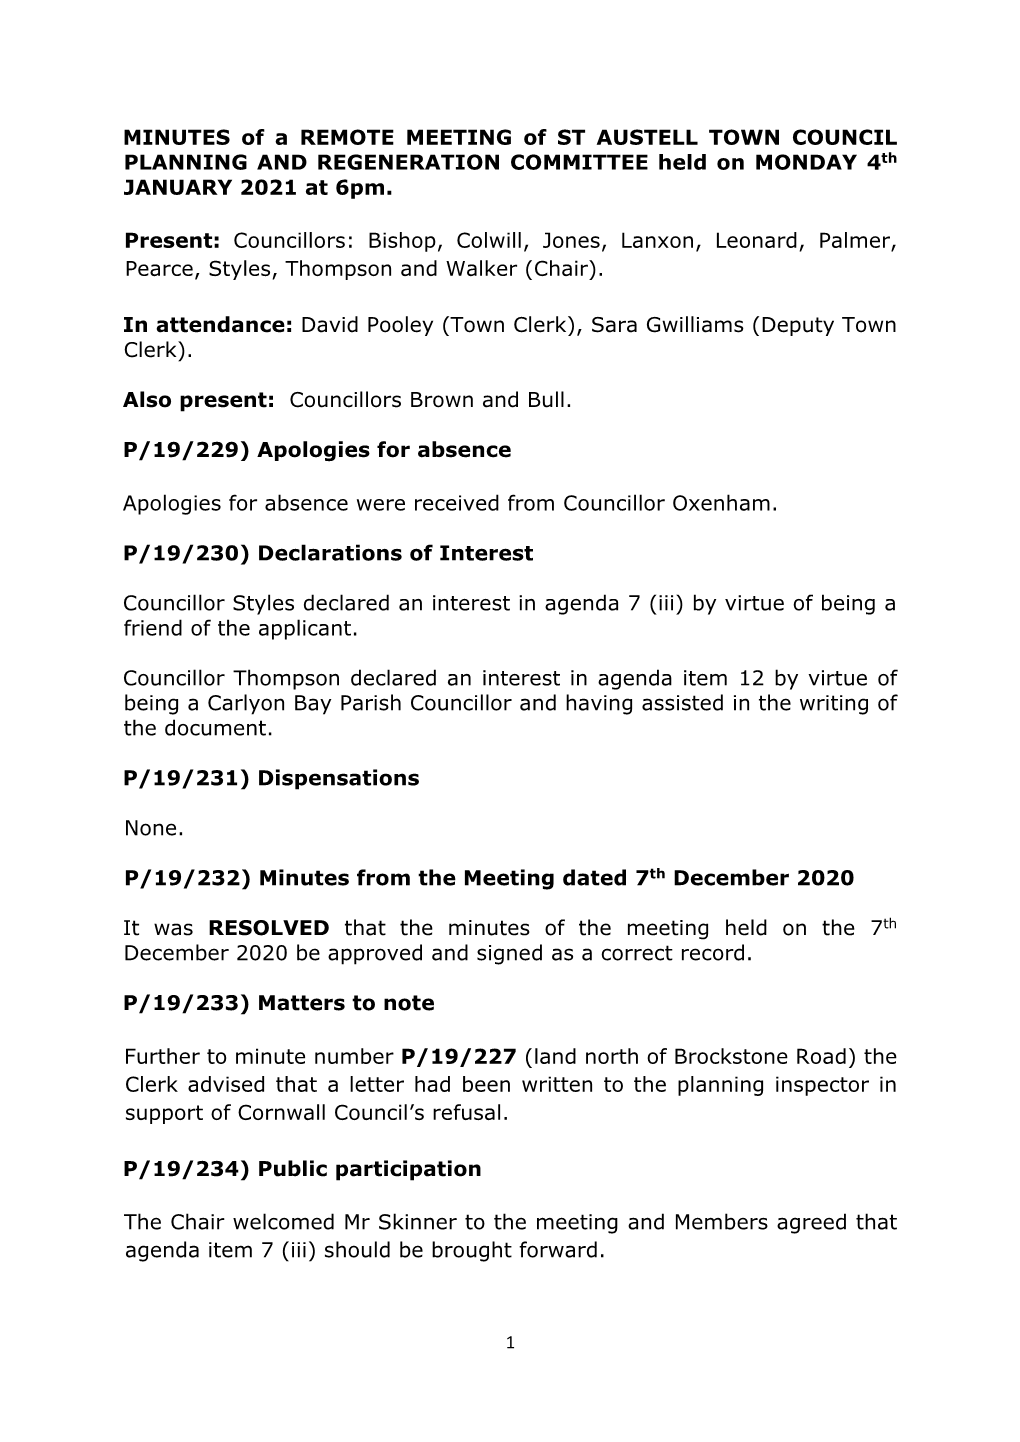 MINUTES of a REMOTE MEETING of ST AUSTELL TOWN COUNCIL PLANNING and REGENERATION COMMITTEE Held on MONDAY 4Th JANUARY 2021 at 6Pm